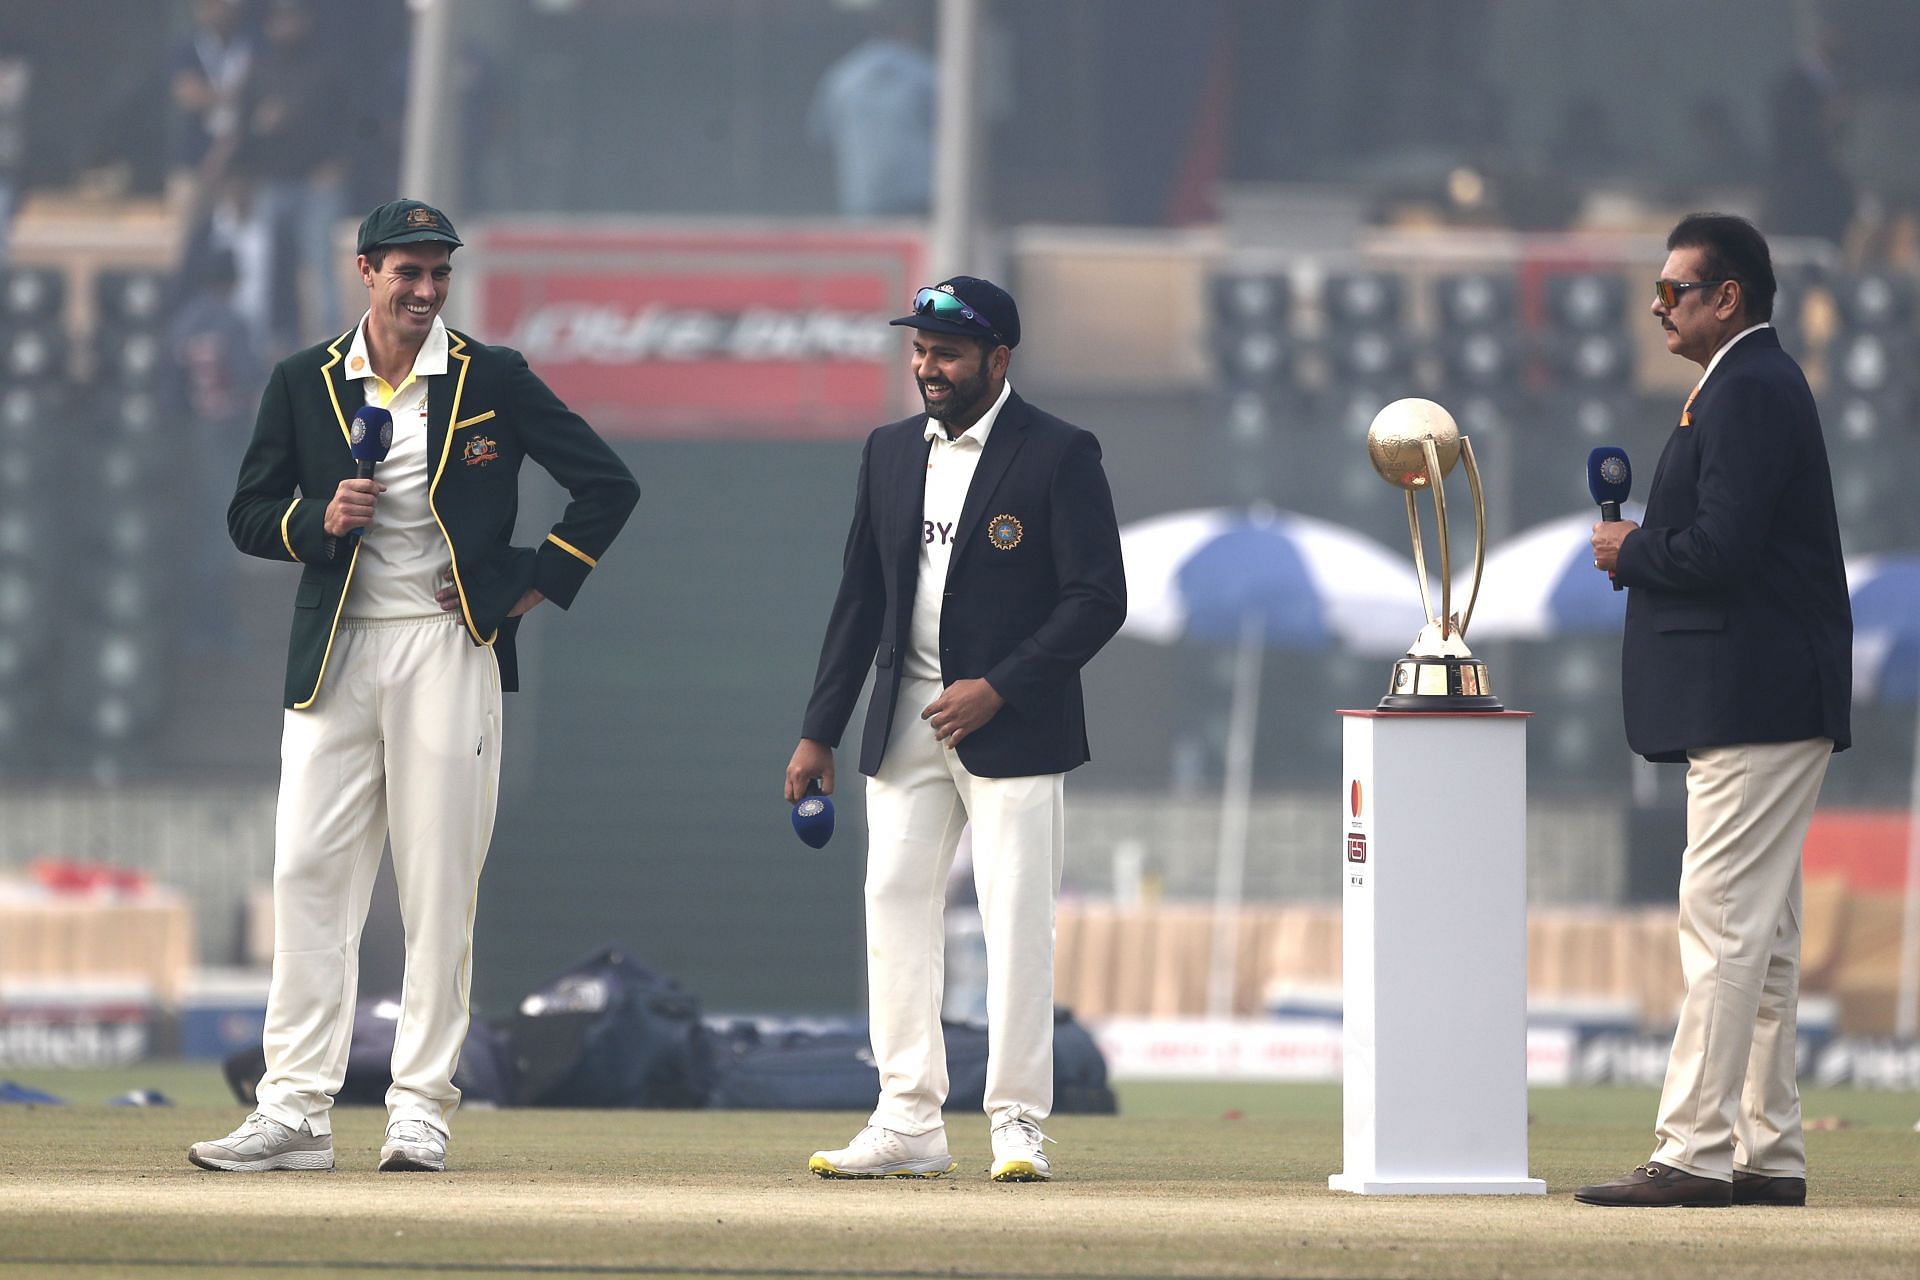 IND vs AUS weather update: Indore weather report for March 1-5 for 3rd India vs Australia Test